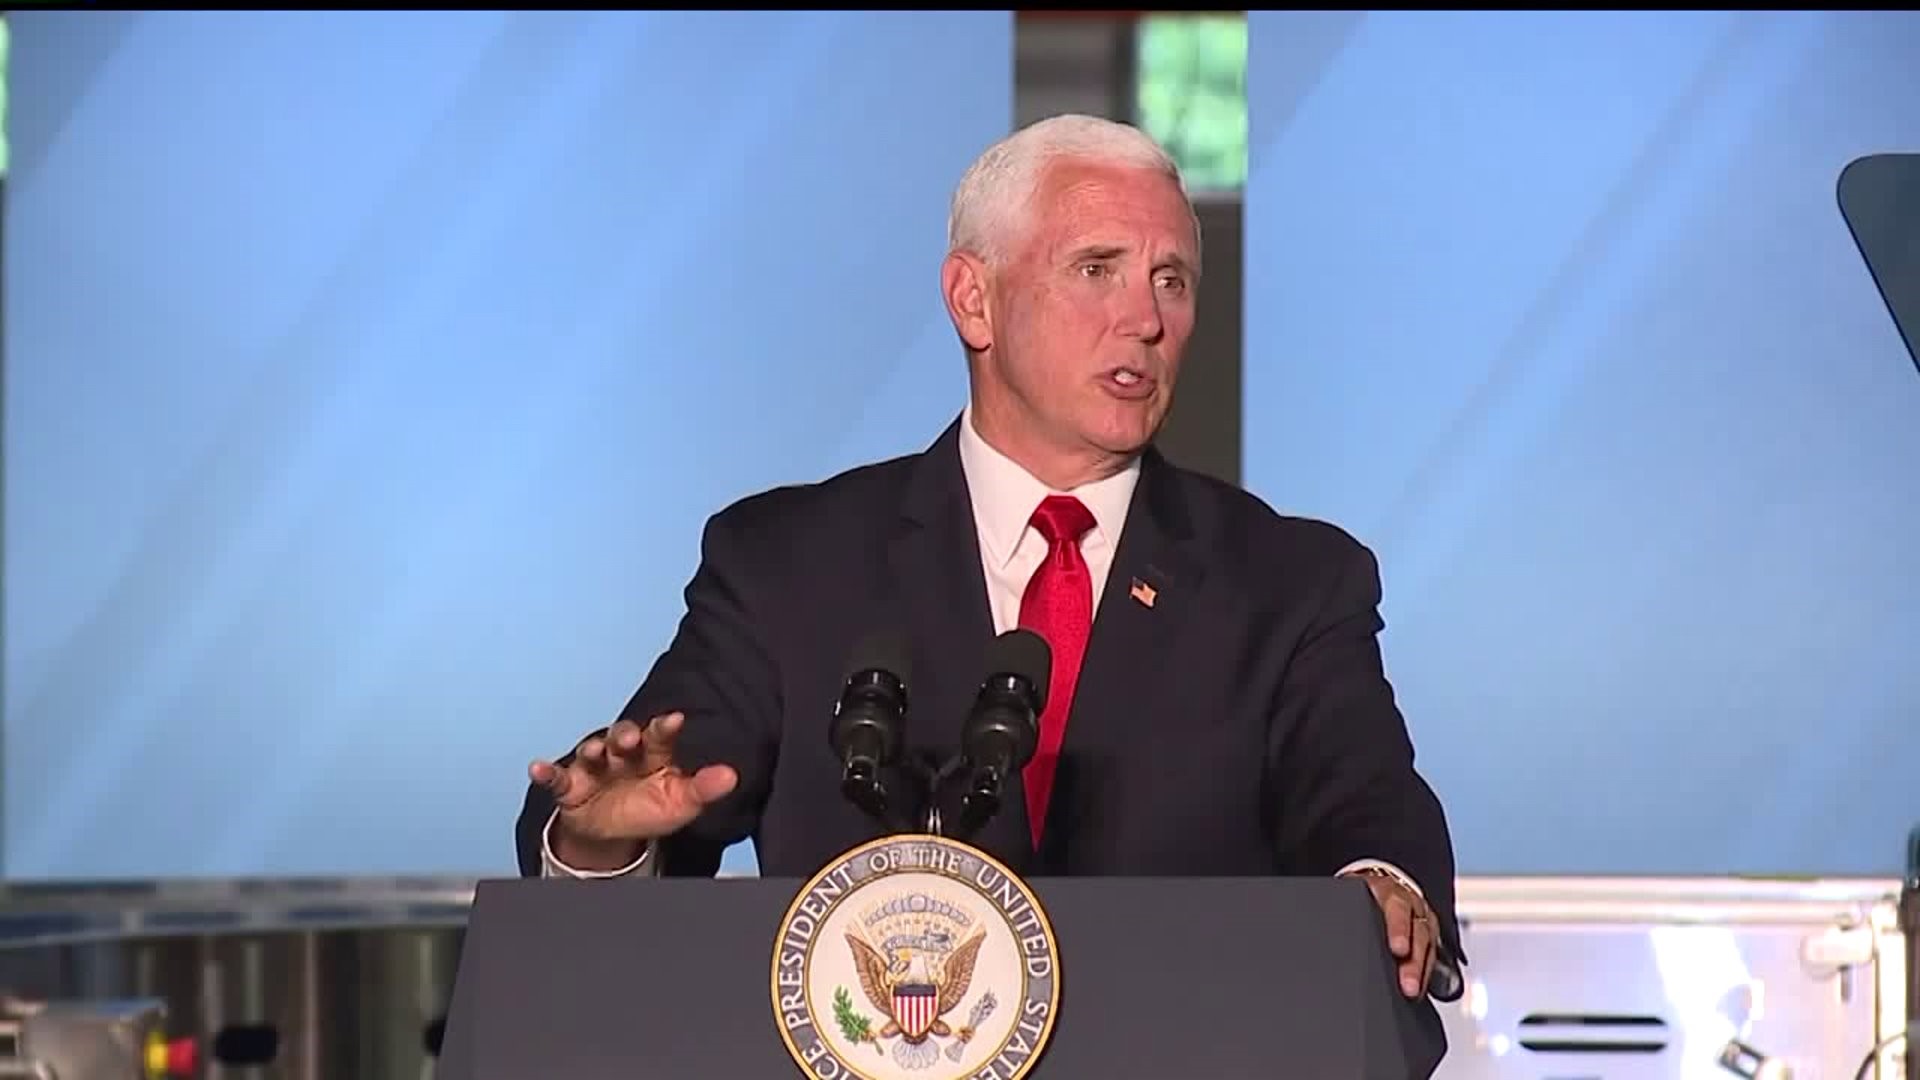 VP Mike Pence visits Springettsbury Township plant JLS Automation